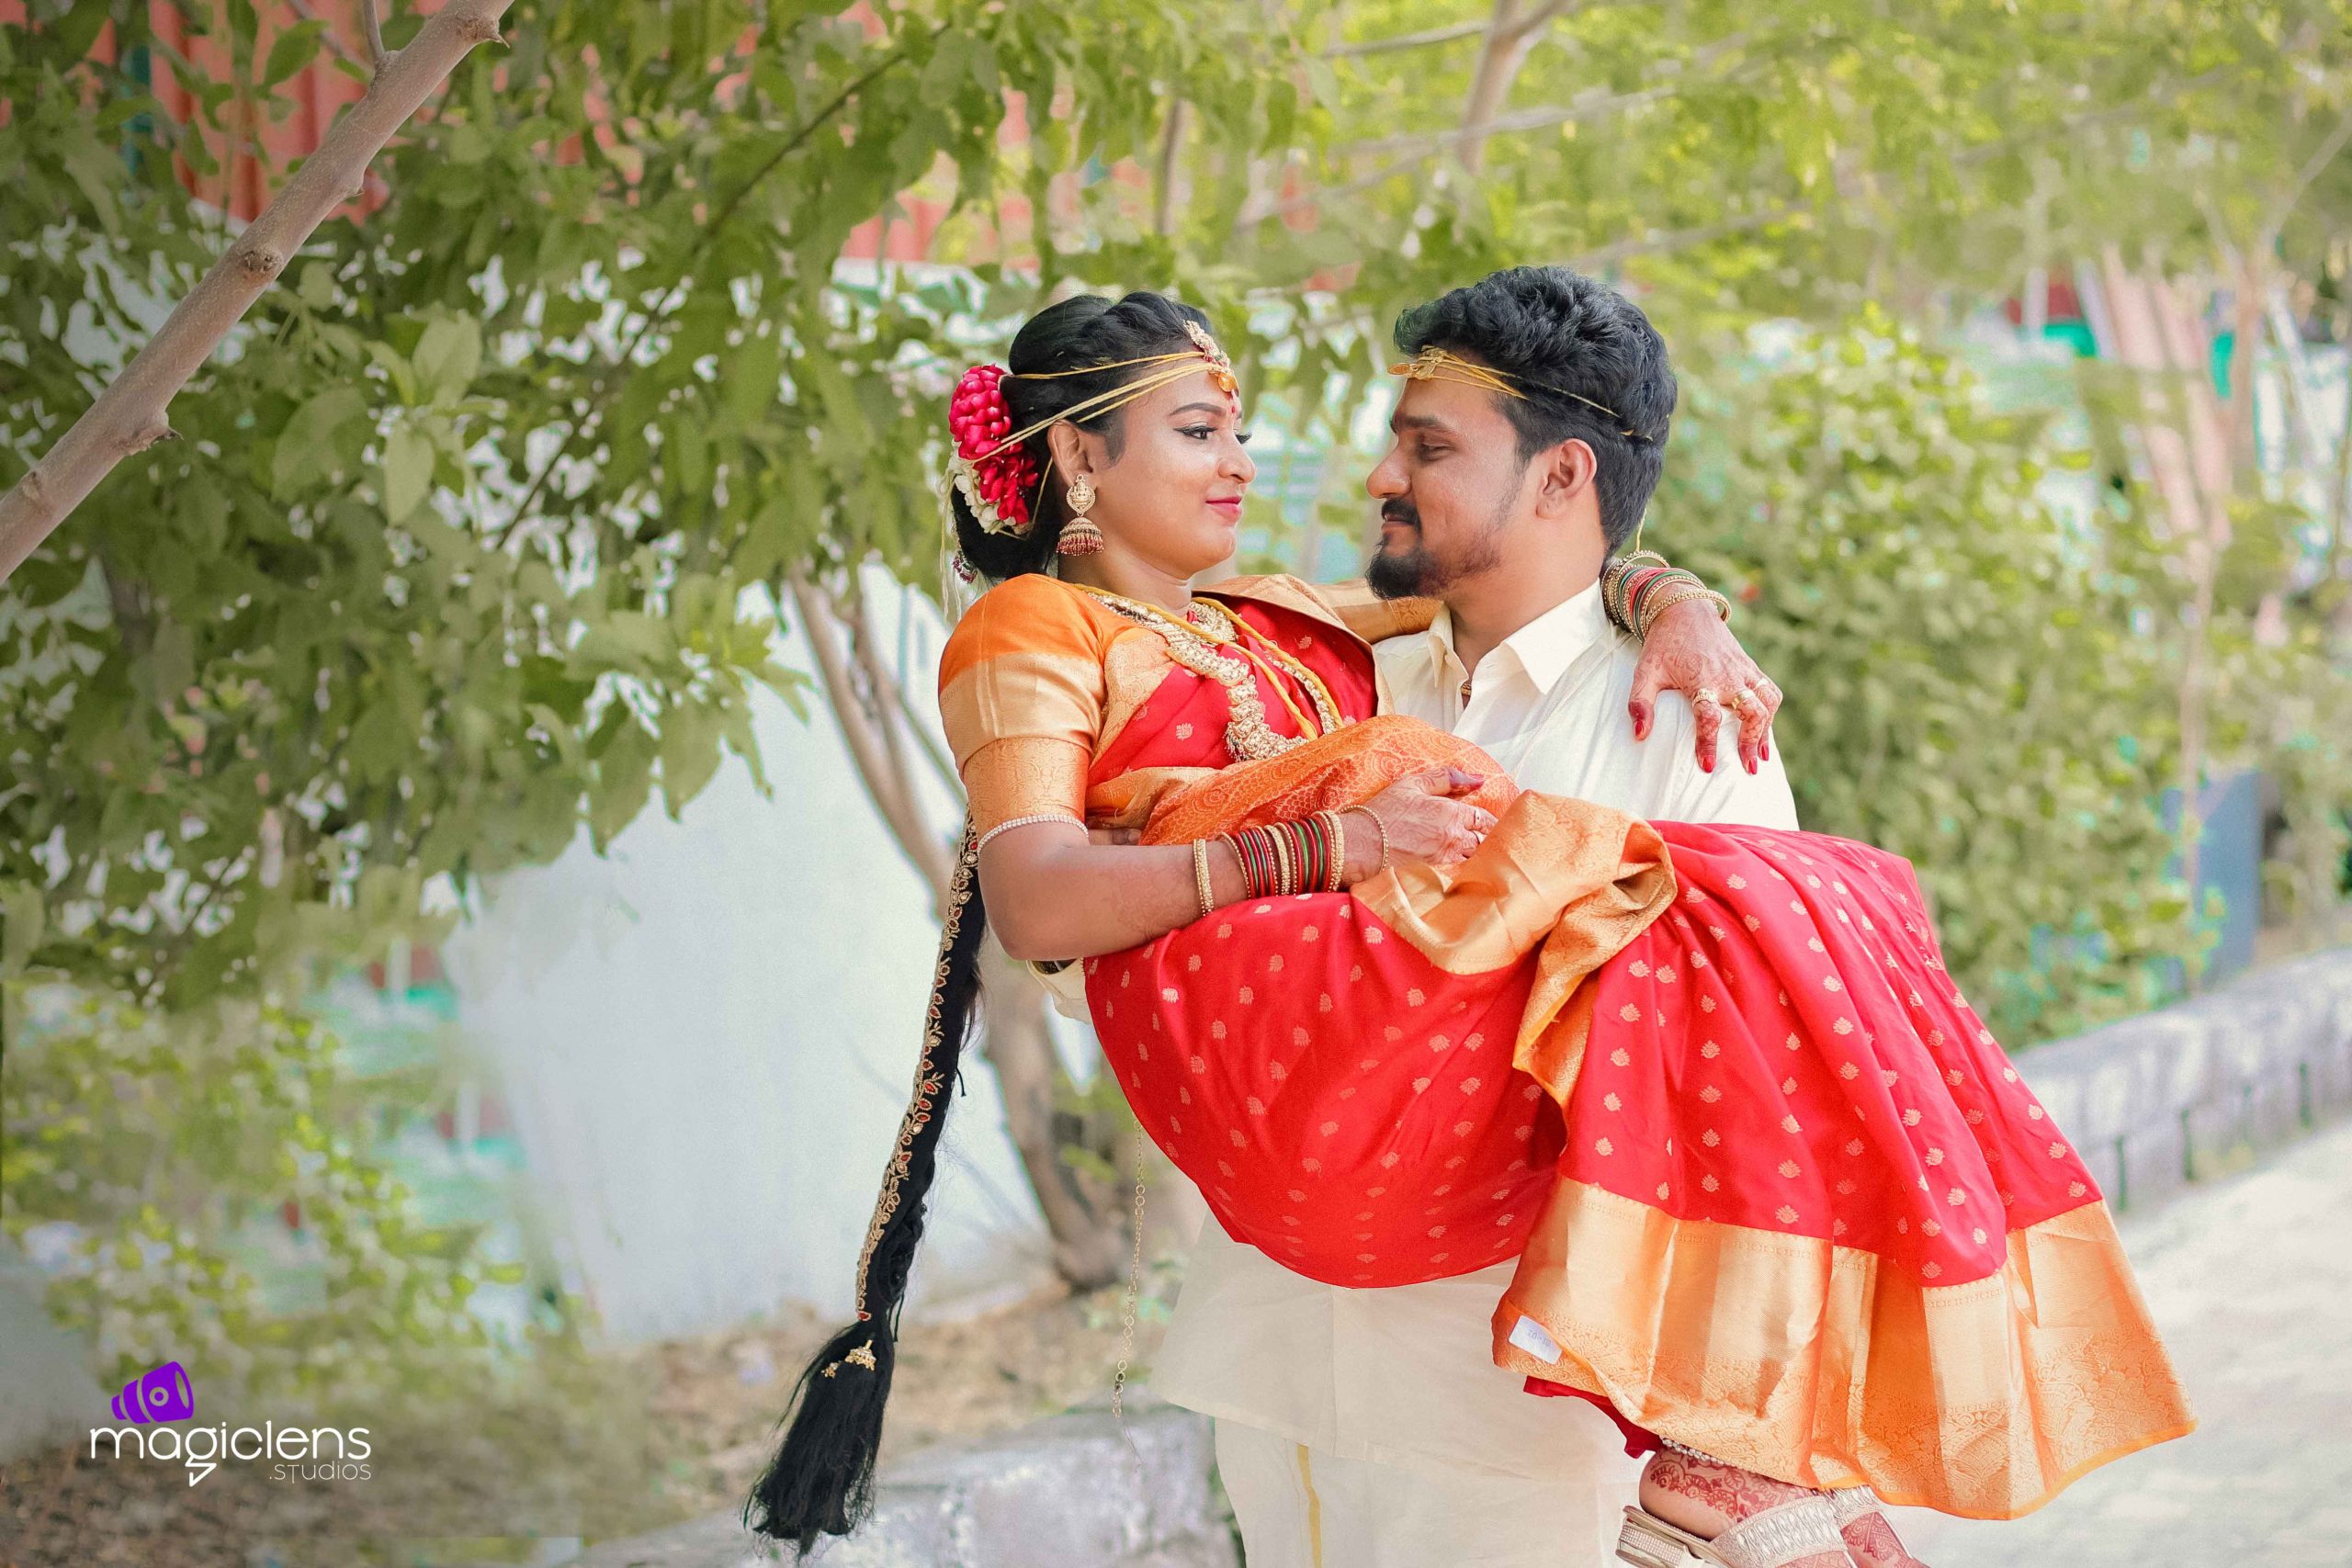 Can't Stop Smiling Looking At These Adorable South Indian Couple Shots! |  Indian wedding garland, Indian wedding couple, Indian wedding photography